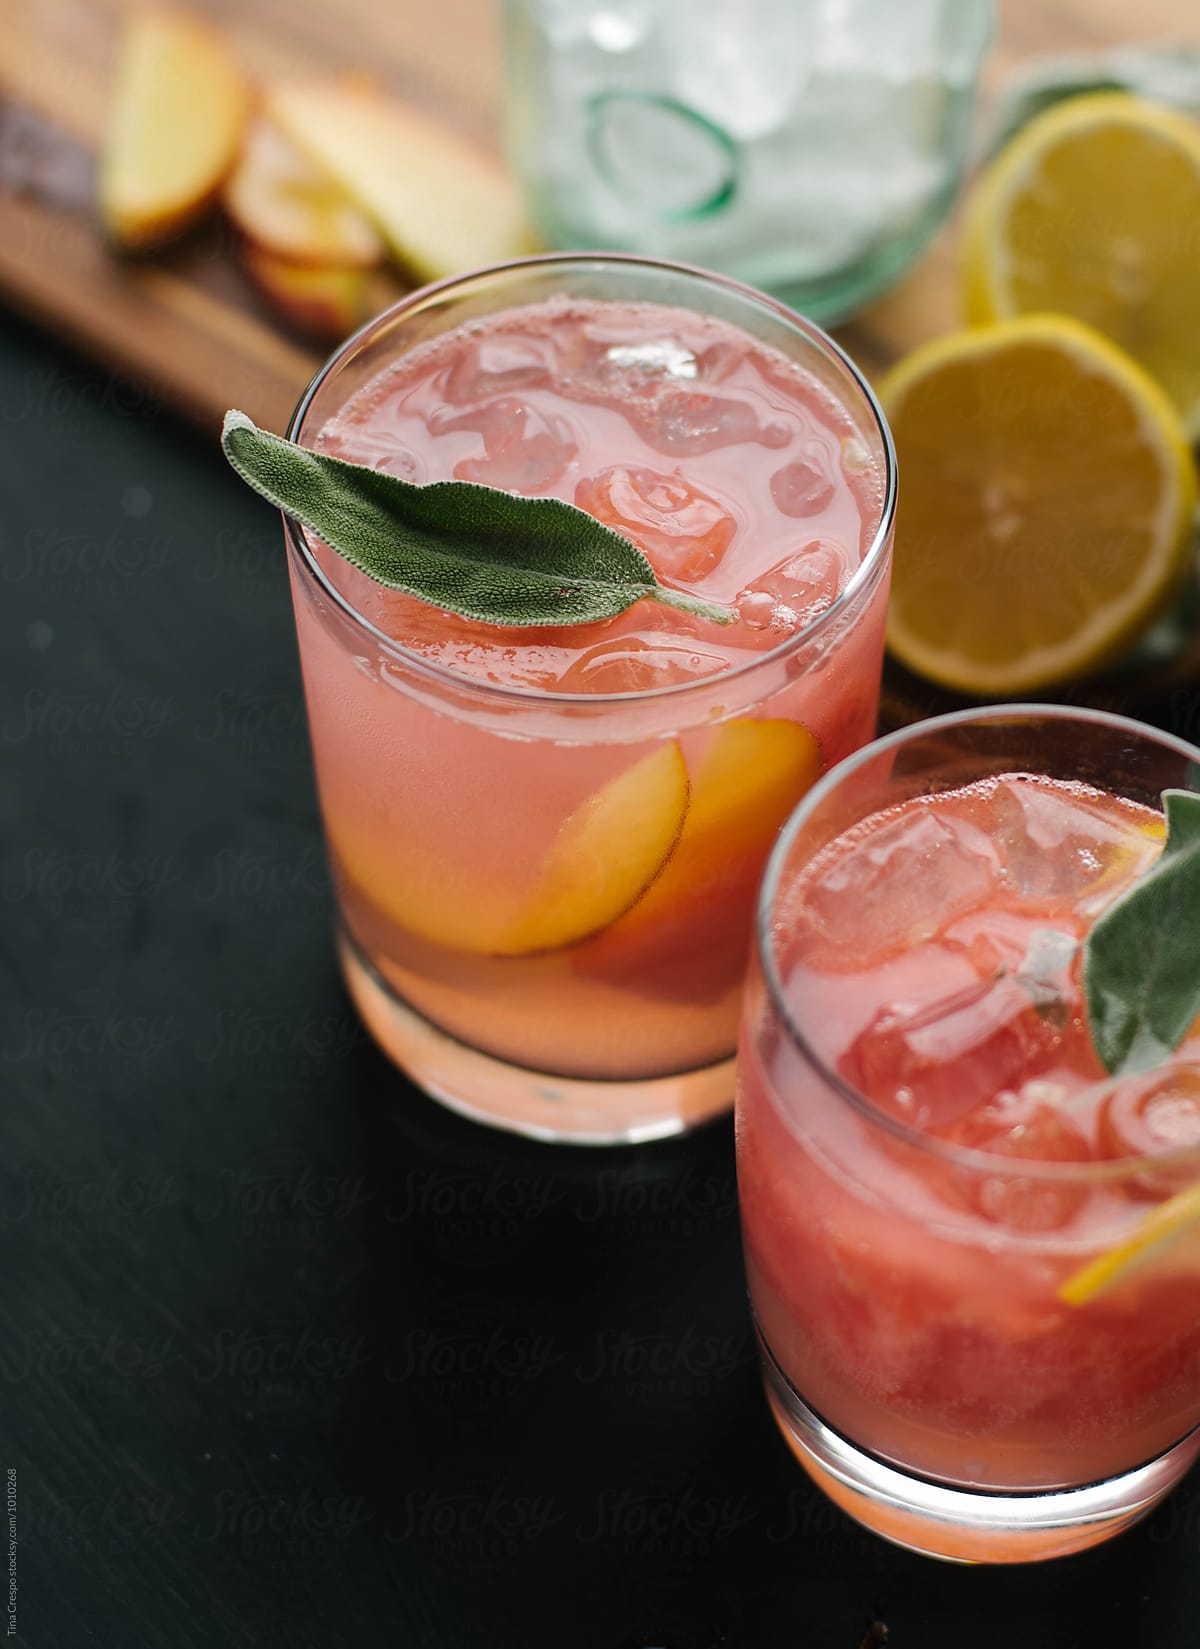 Peach and Lemon Mixed Drink